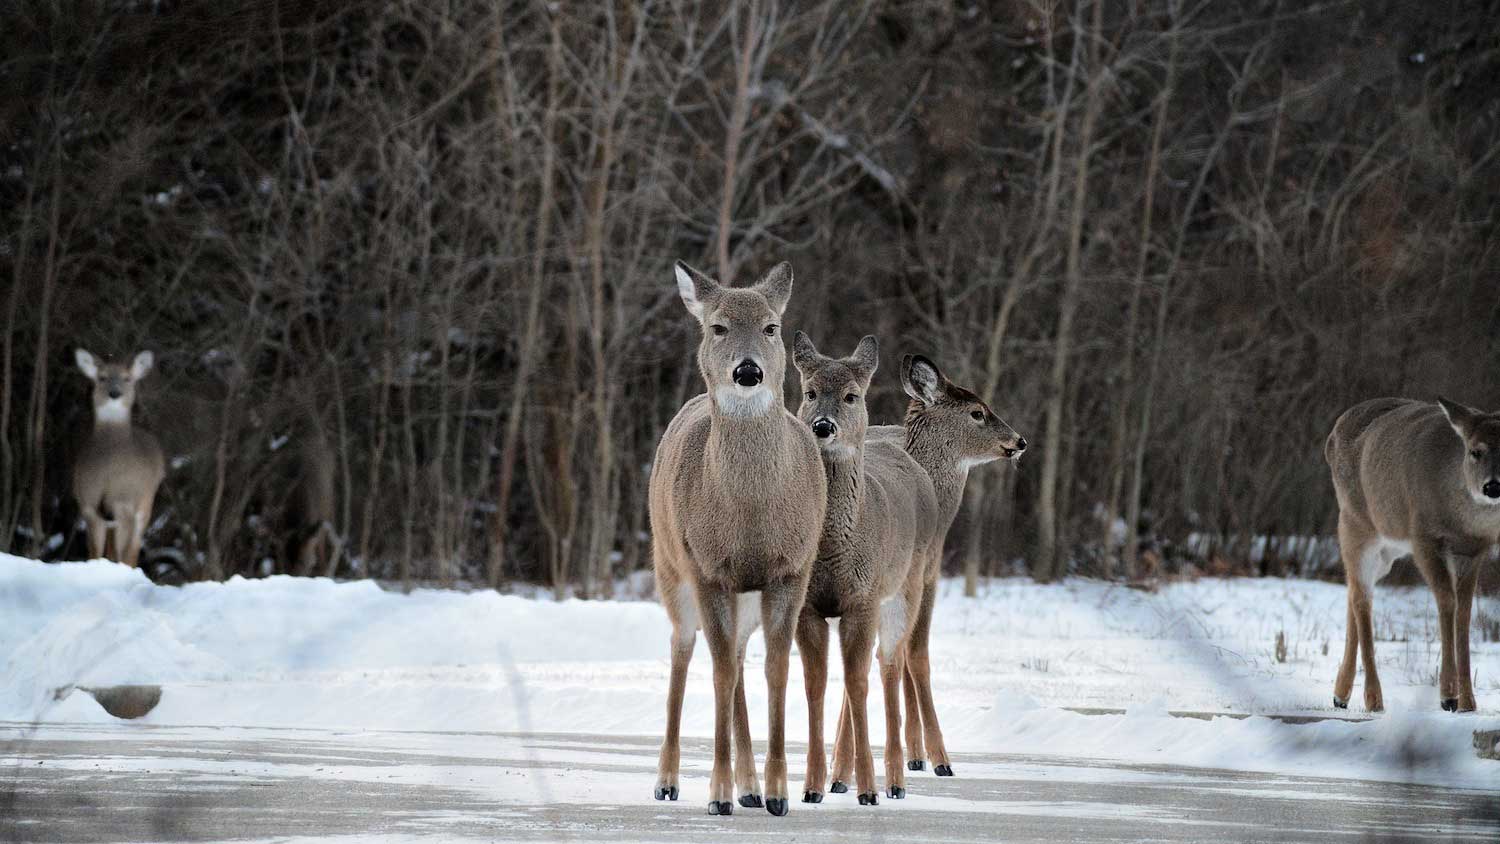 A group of three deer standing next to one another on ice with other deer in the background.